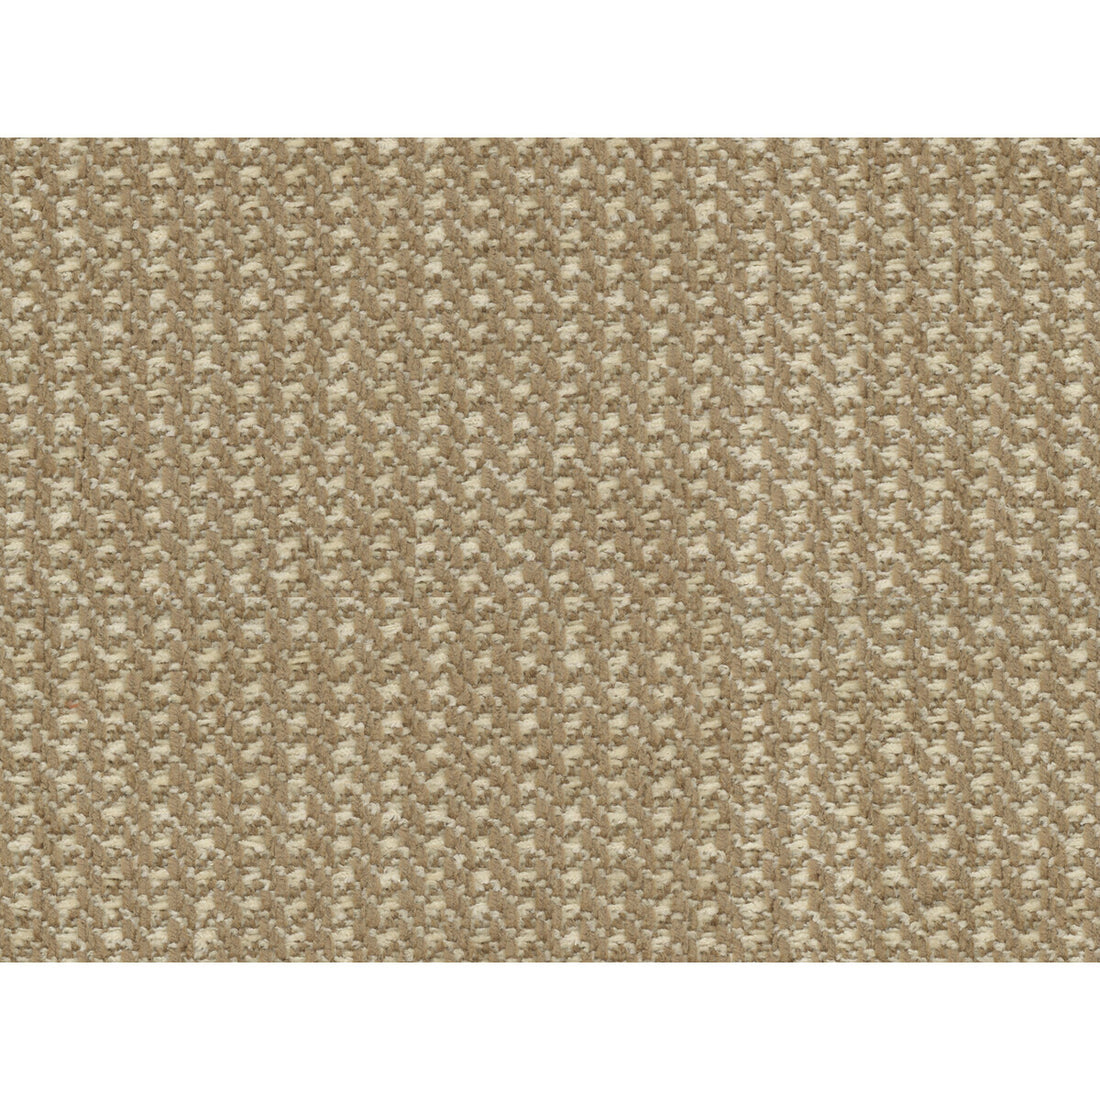 Granier Chenille fabric in toffee color - pattern 8016105.116.0 - by Brunschwig &amp; Fils in the Chambery Textures collection